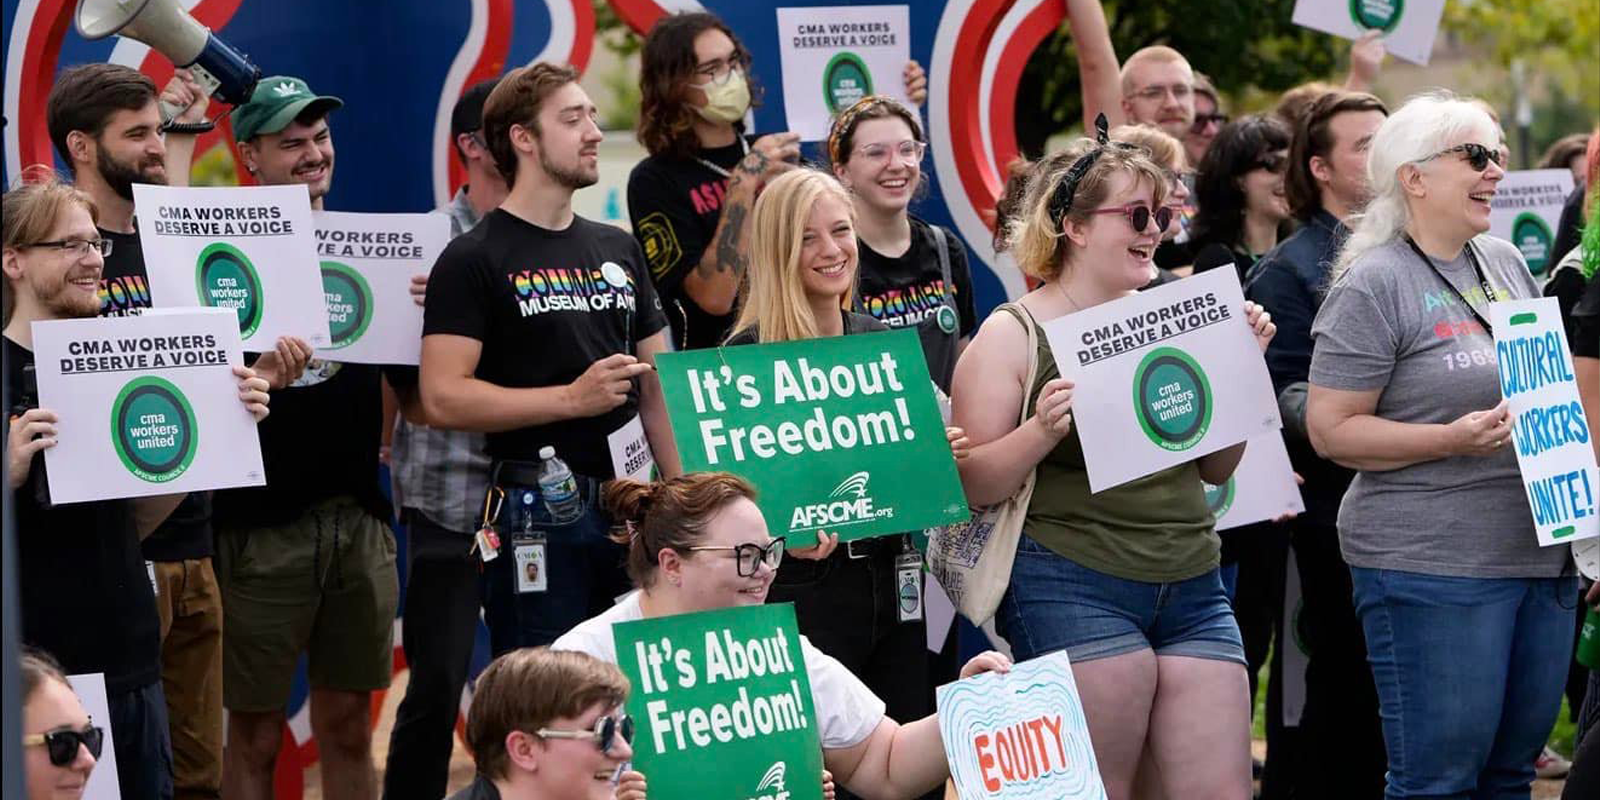 In landslide victory, workers at Columbus Museum of Art vote to unionize with AFSCME